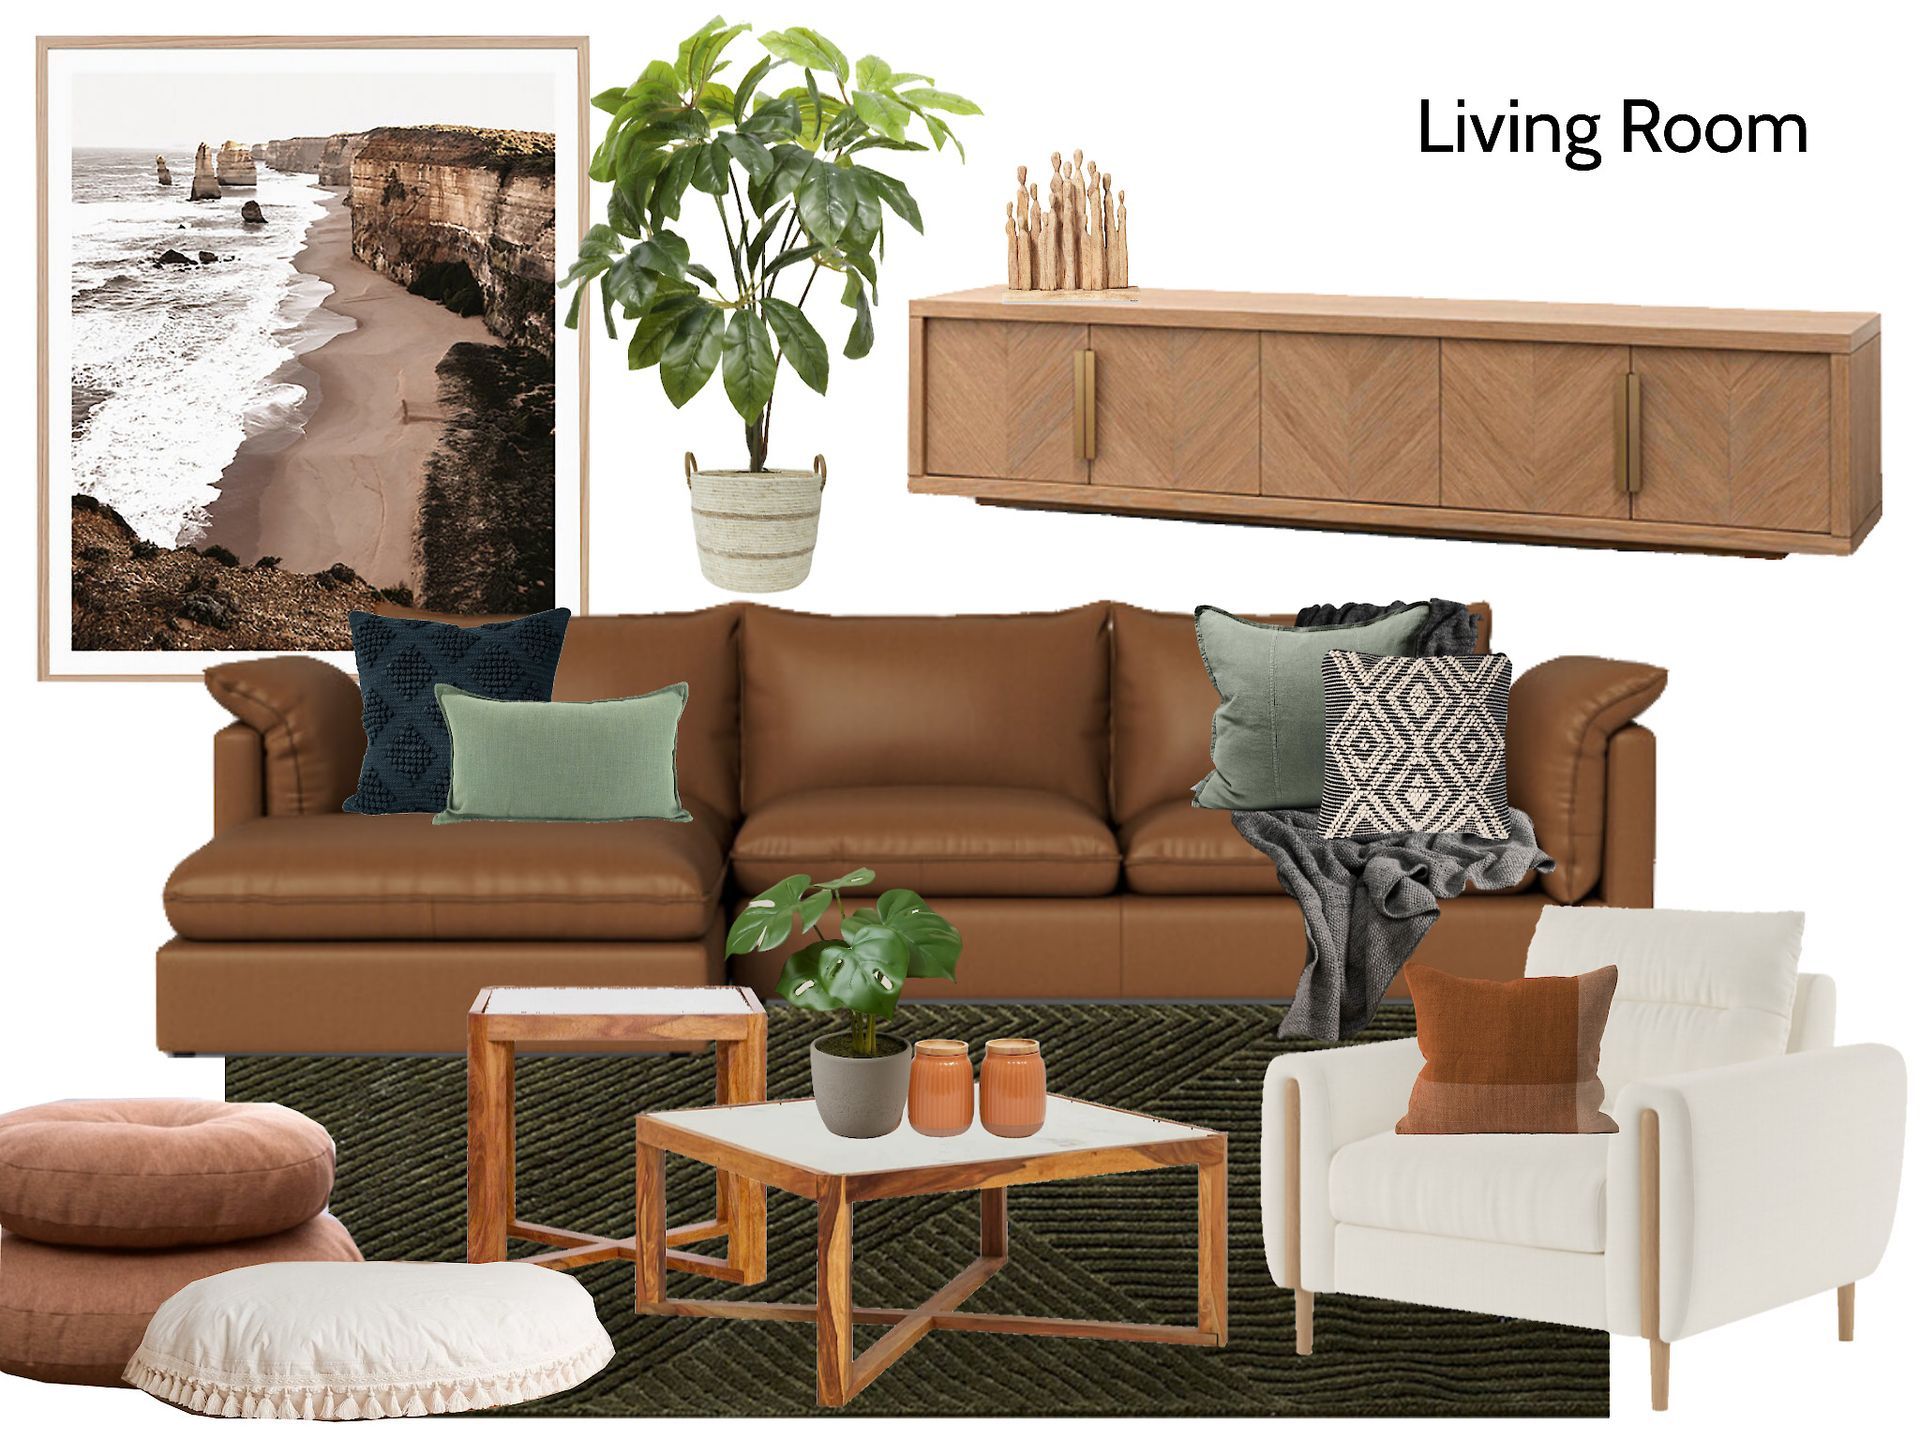 A living room with a brown leather couch and a white chair